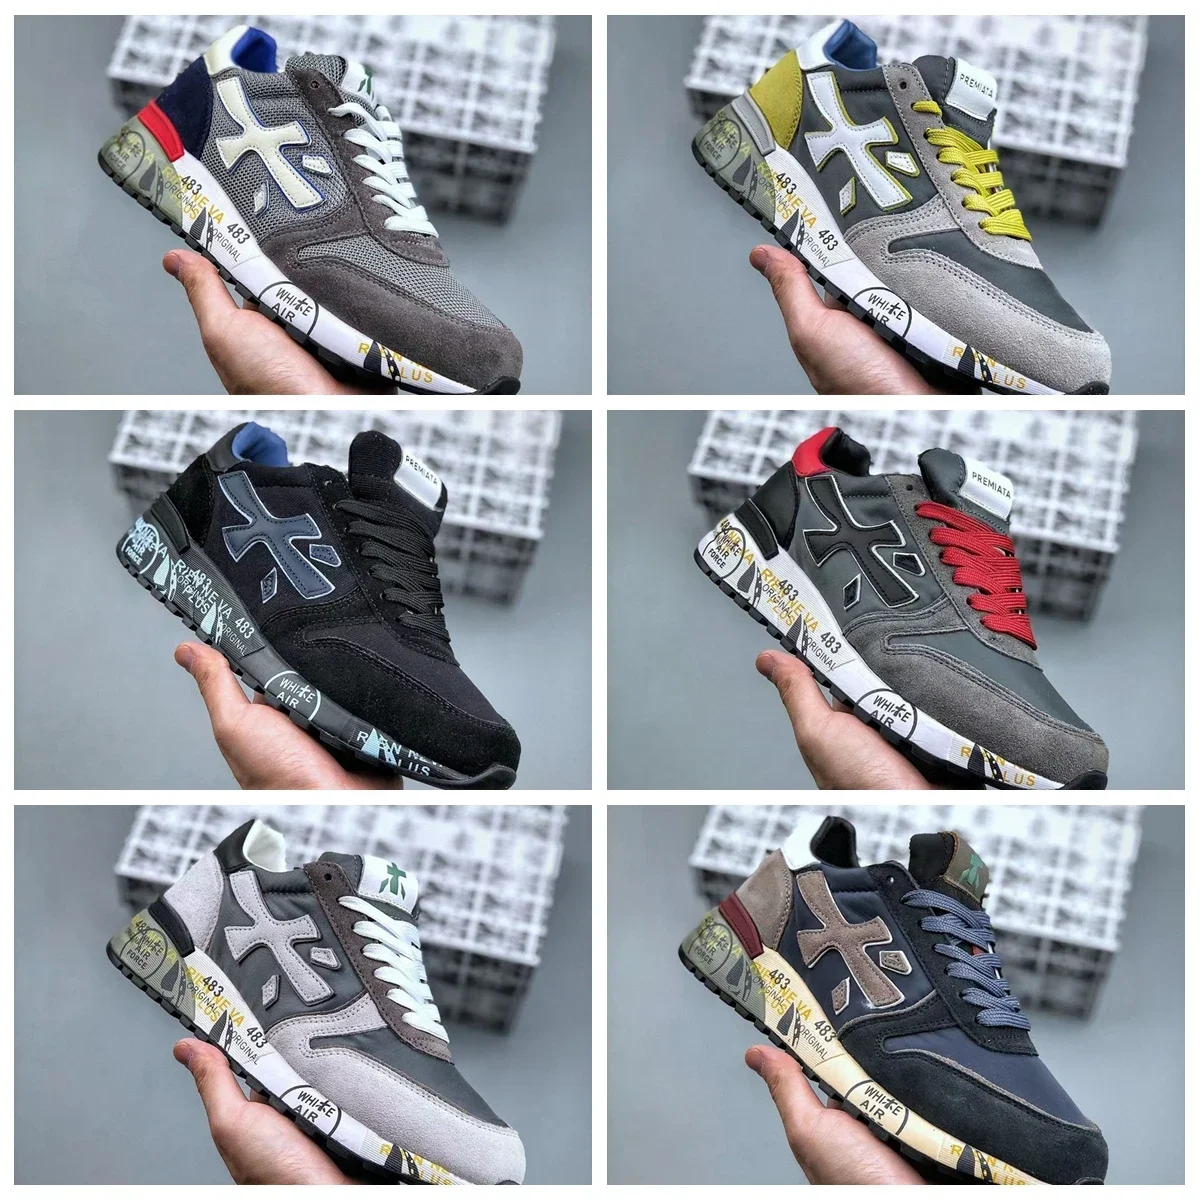 

Men's PREMIATA Shoes Fashion Lightning Skateboard Running Shoes Breathable Casual Shoes Student Couple Outdoor Sneakers Eur40-45